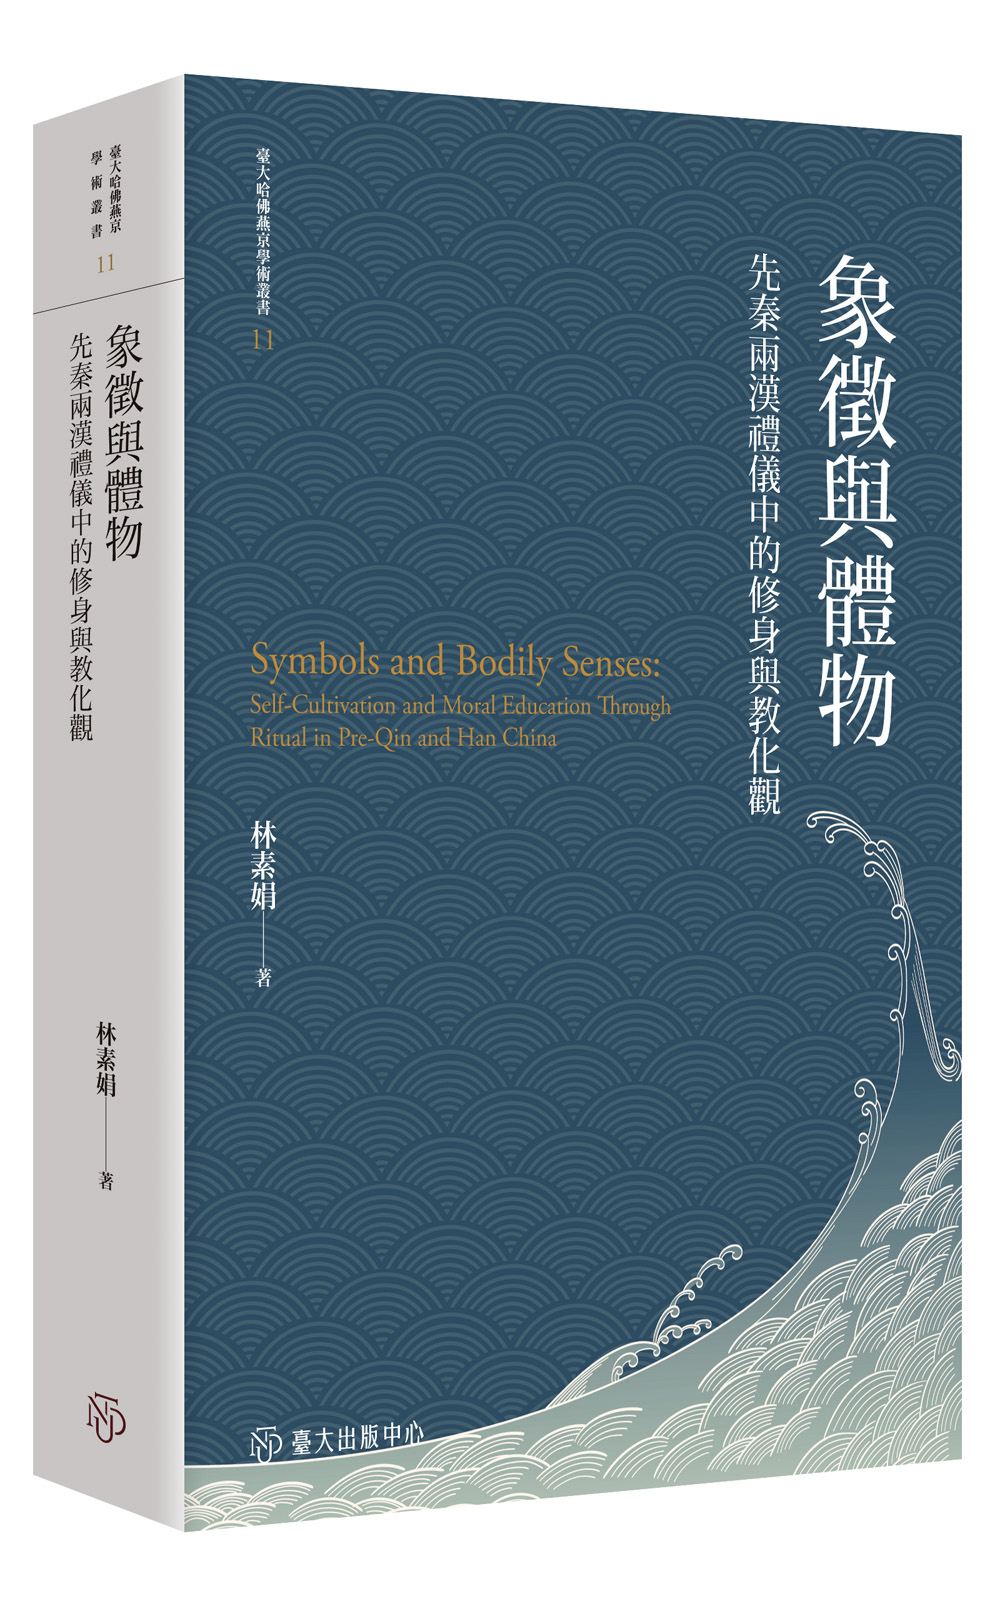 Symbols and Bodily Senses: Self-Cultivation and Moral Education Through Ritual in Pre-Qin and Han China